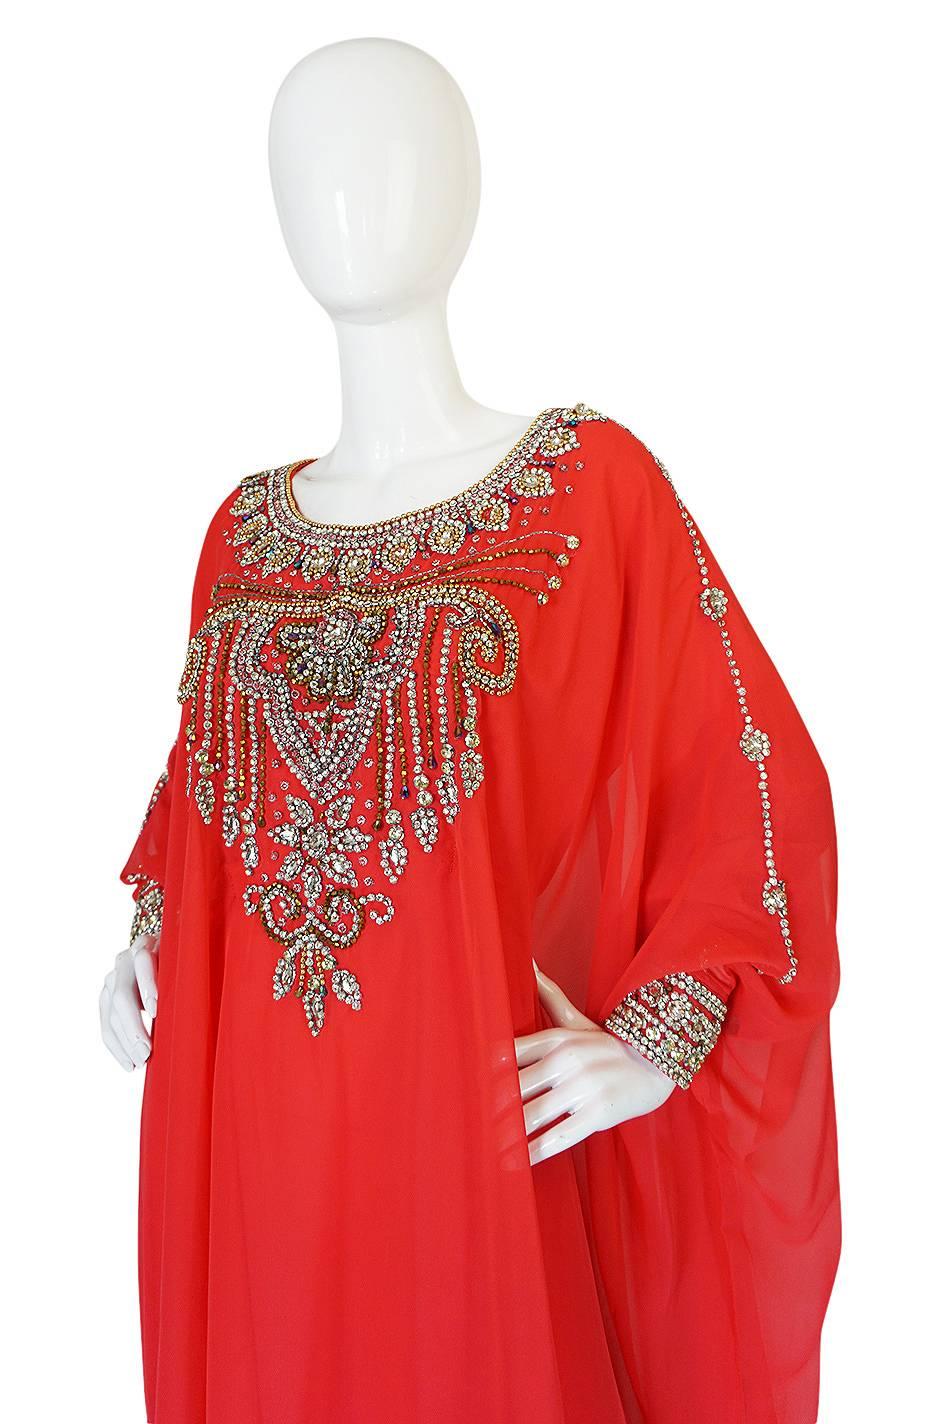 1960s Elaborate Crystal Covered Jewelled Red Caftan Dress 1